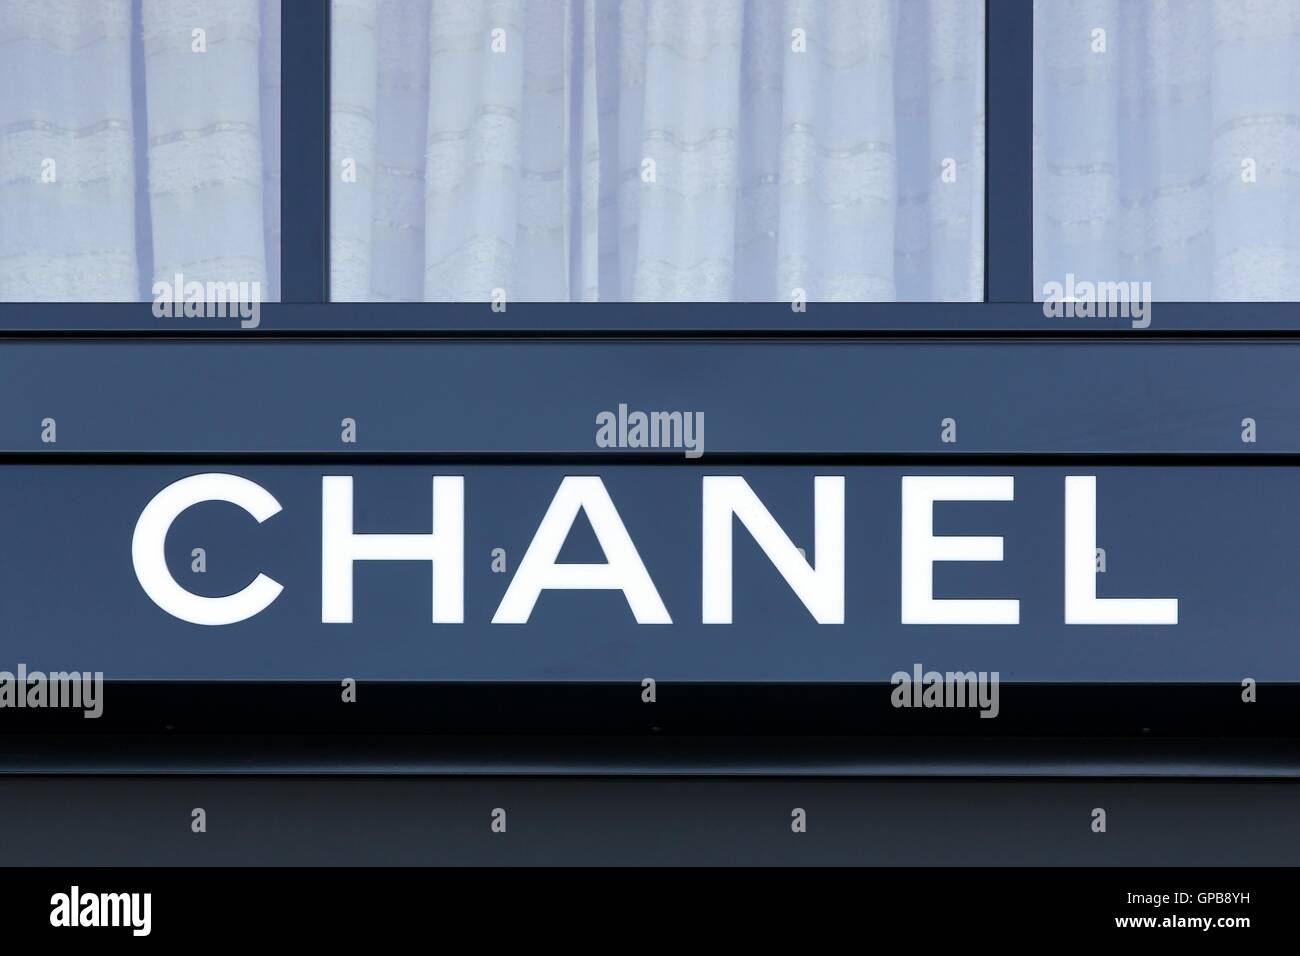 Chanel logo on a wall Stock Photo